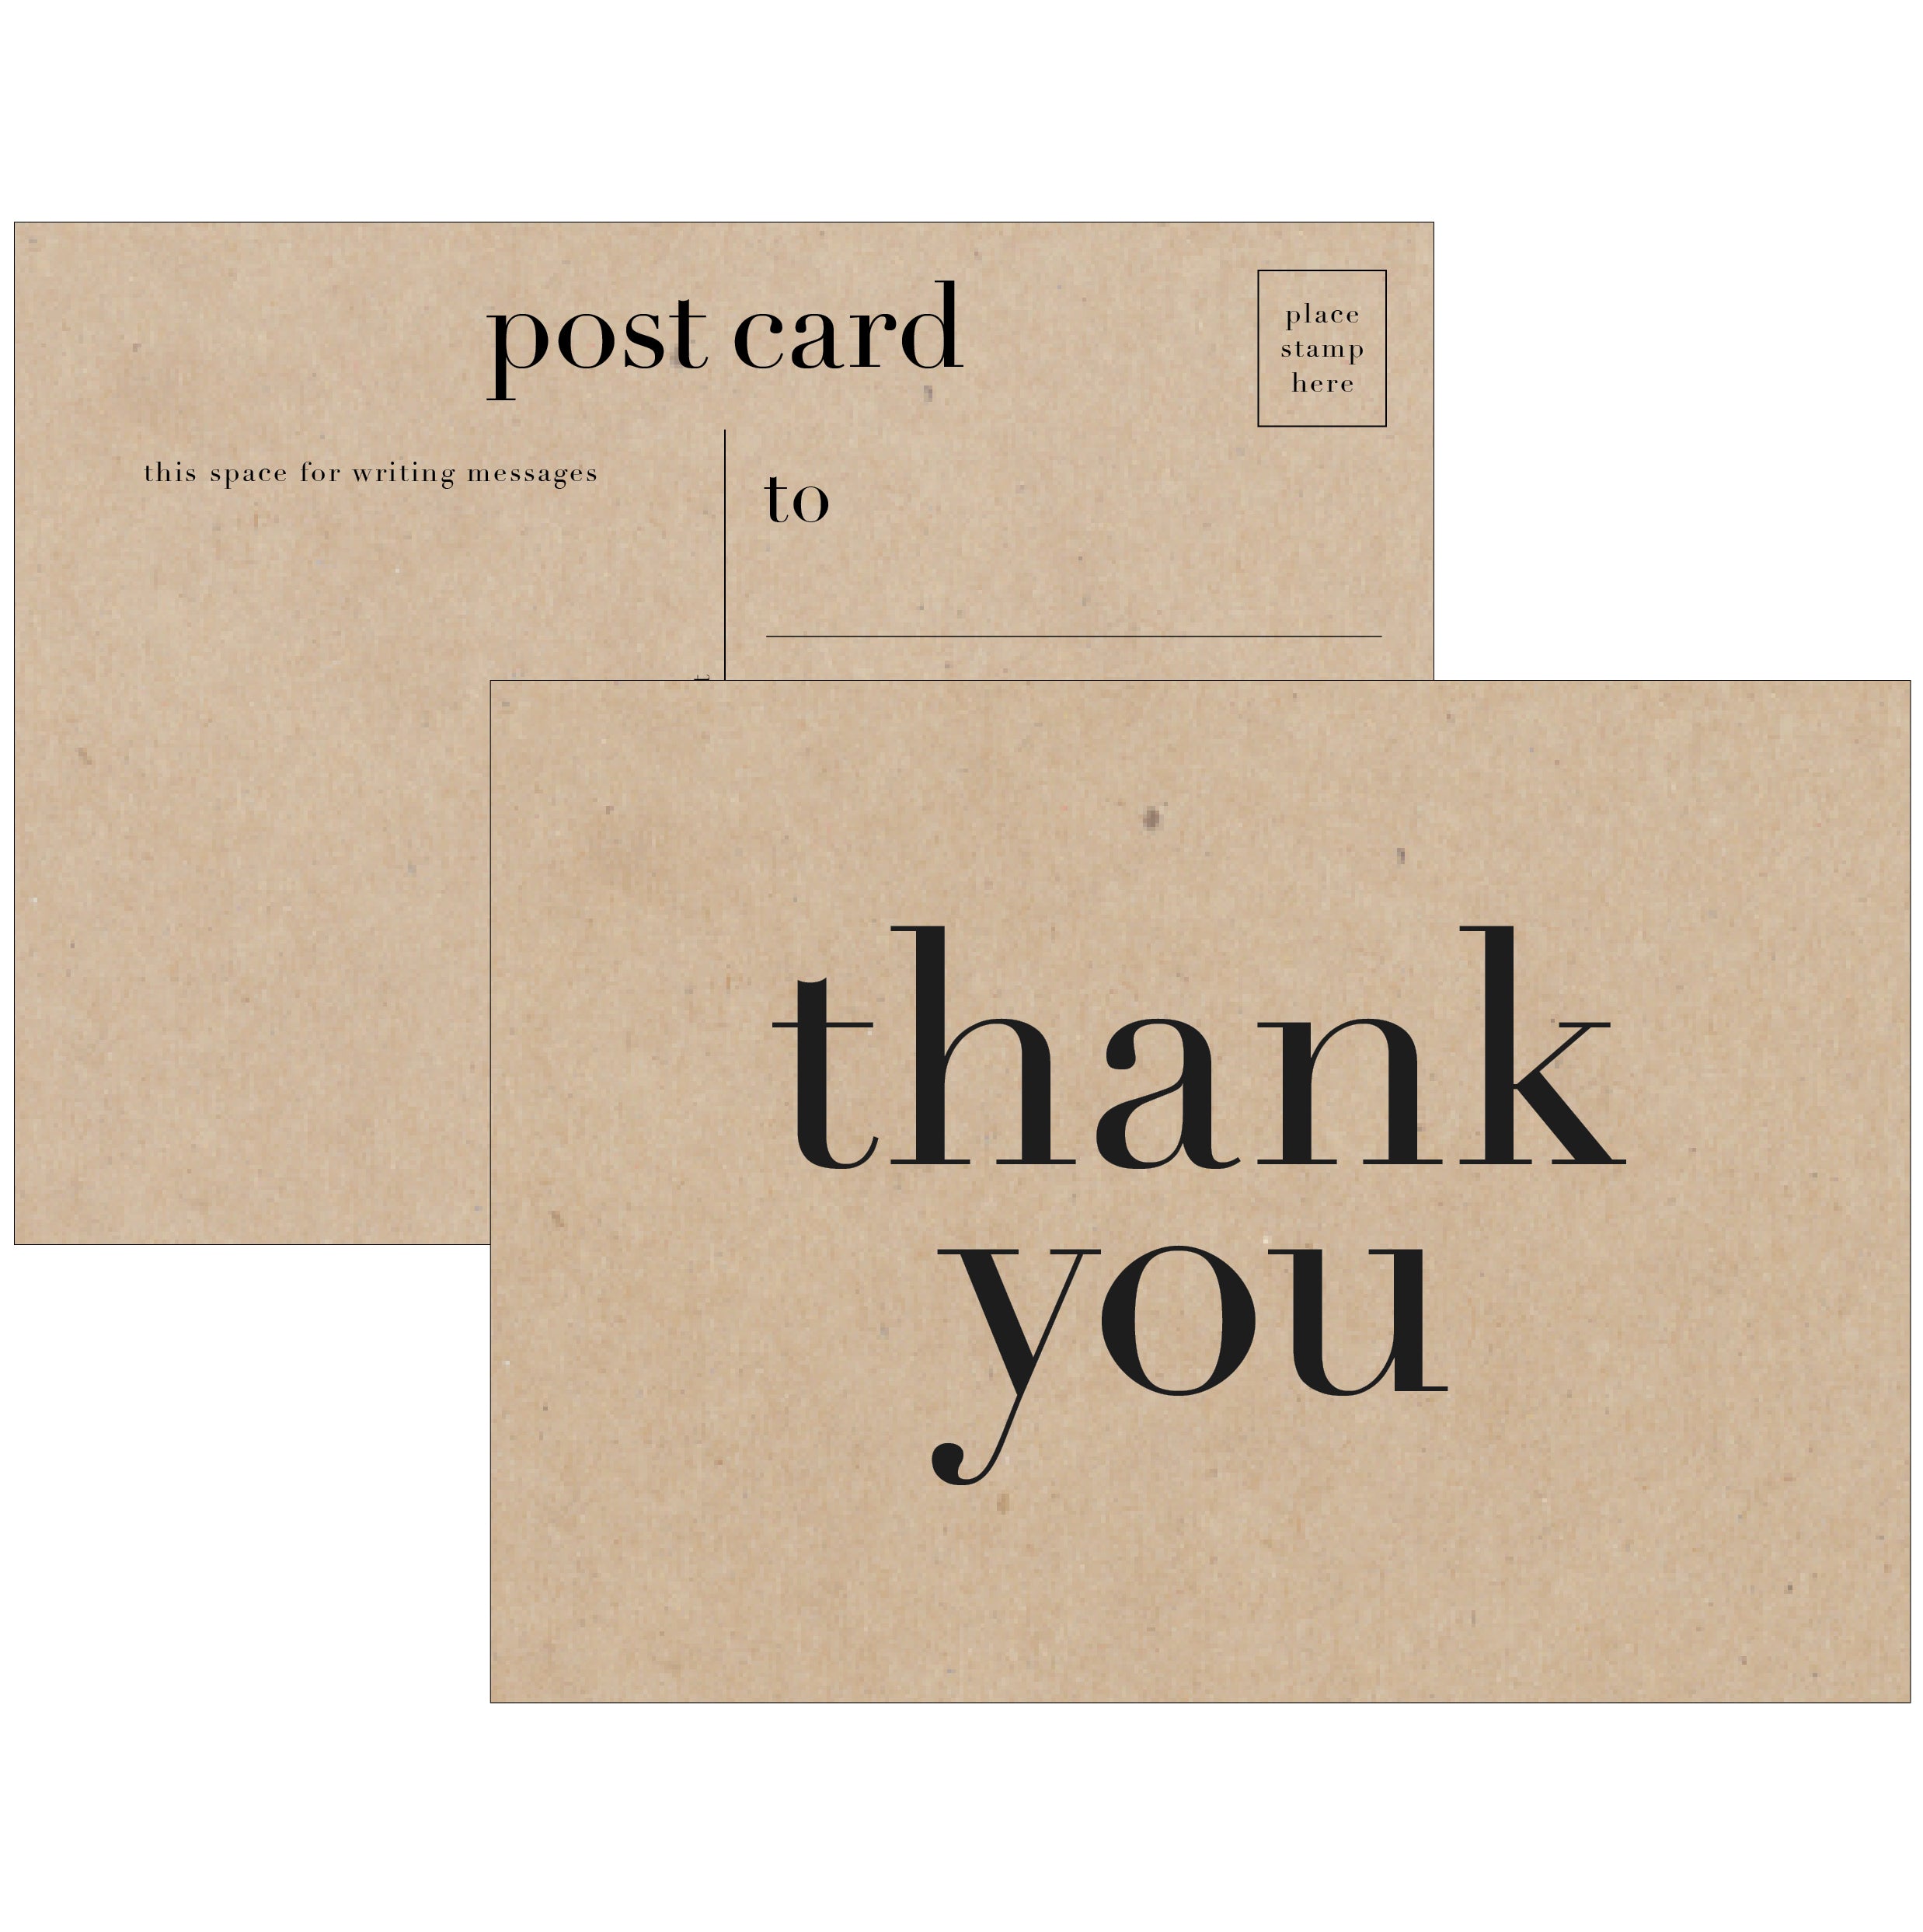 Reskid Order Thank You Cards - 100 Green 4x6 Cards For Small Business -  Blank Back - Thank You For Your Order Postcards Set. 14pt Postcard Paper